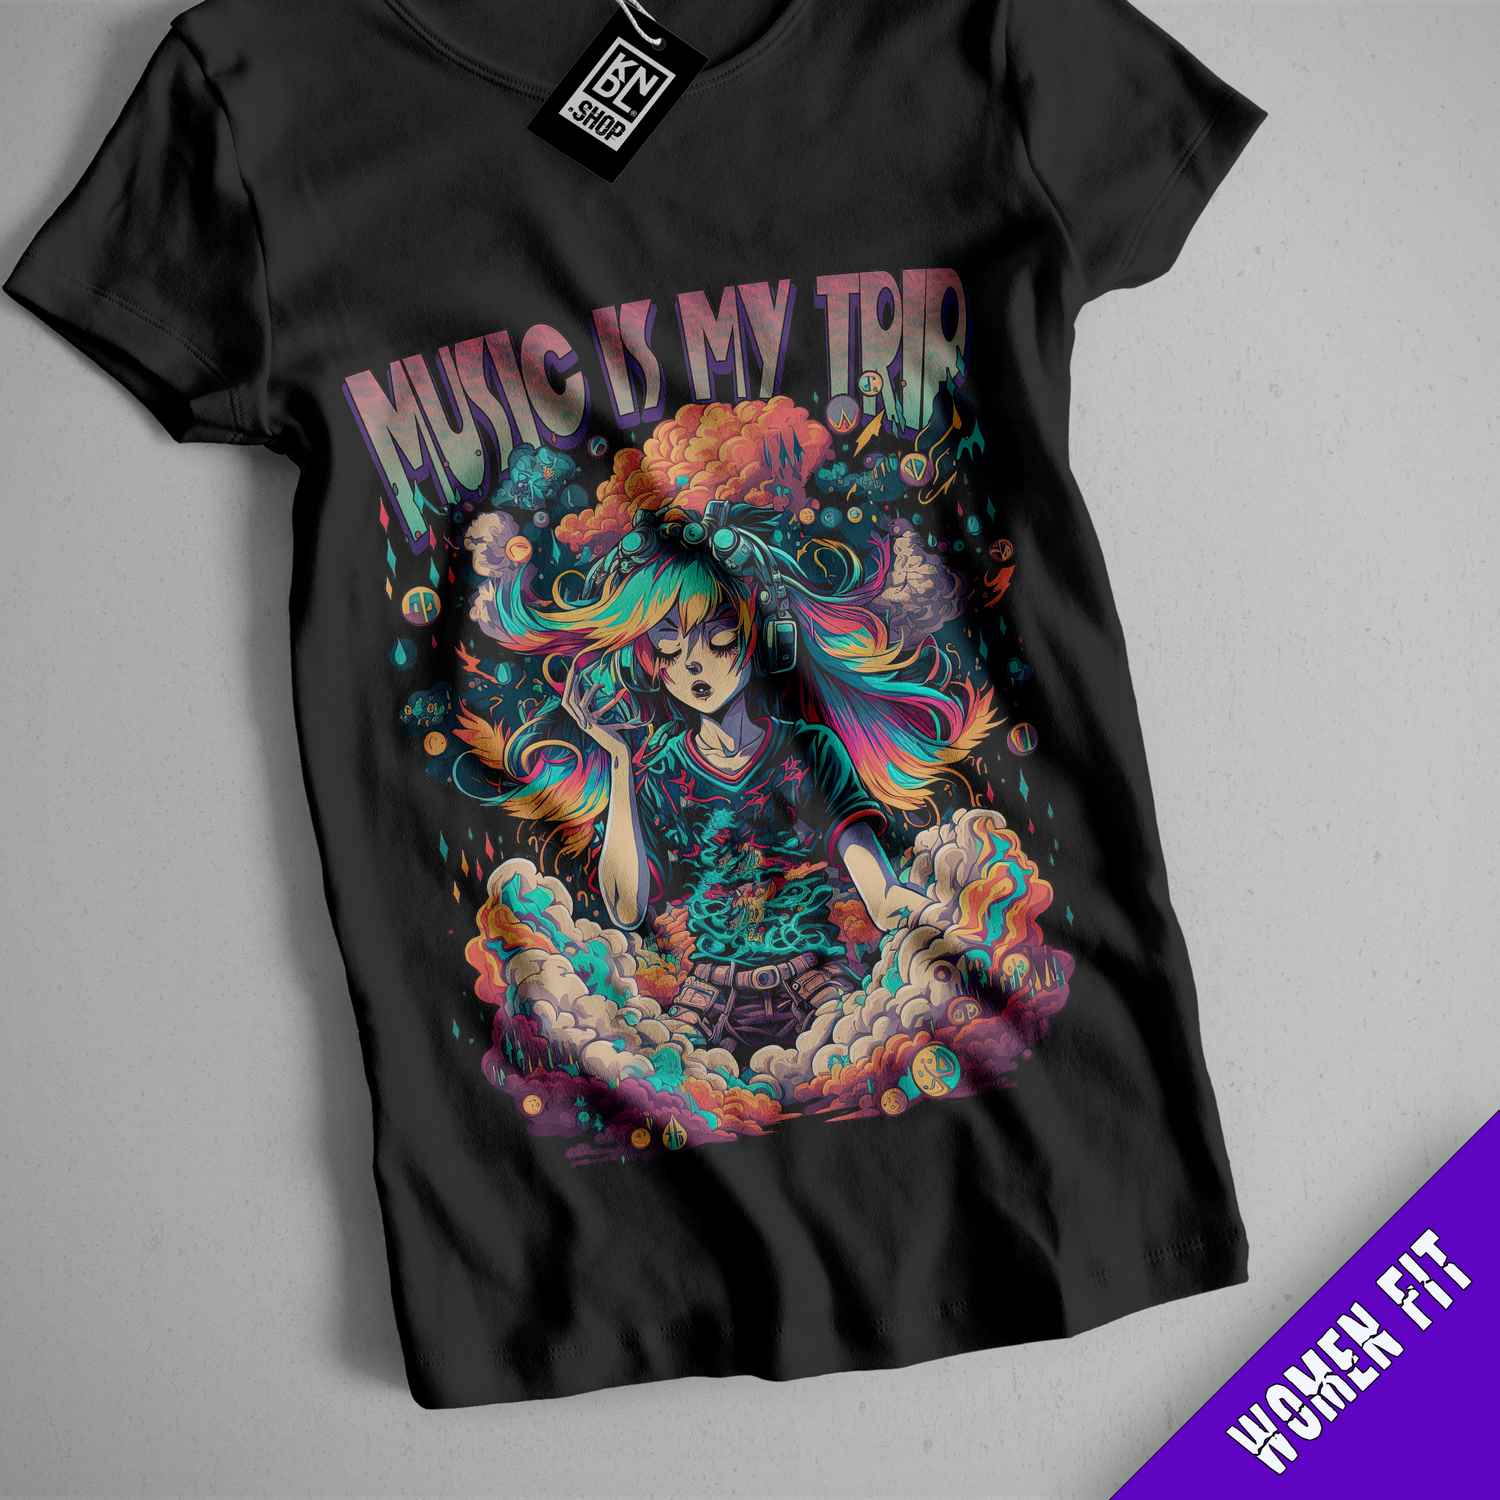 a black t - shirt with a picture of a mermaid on it